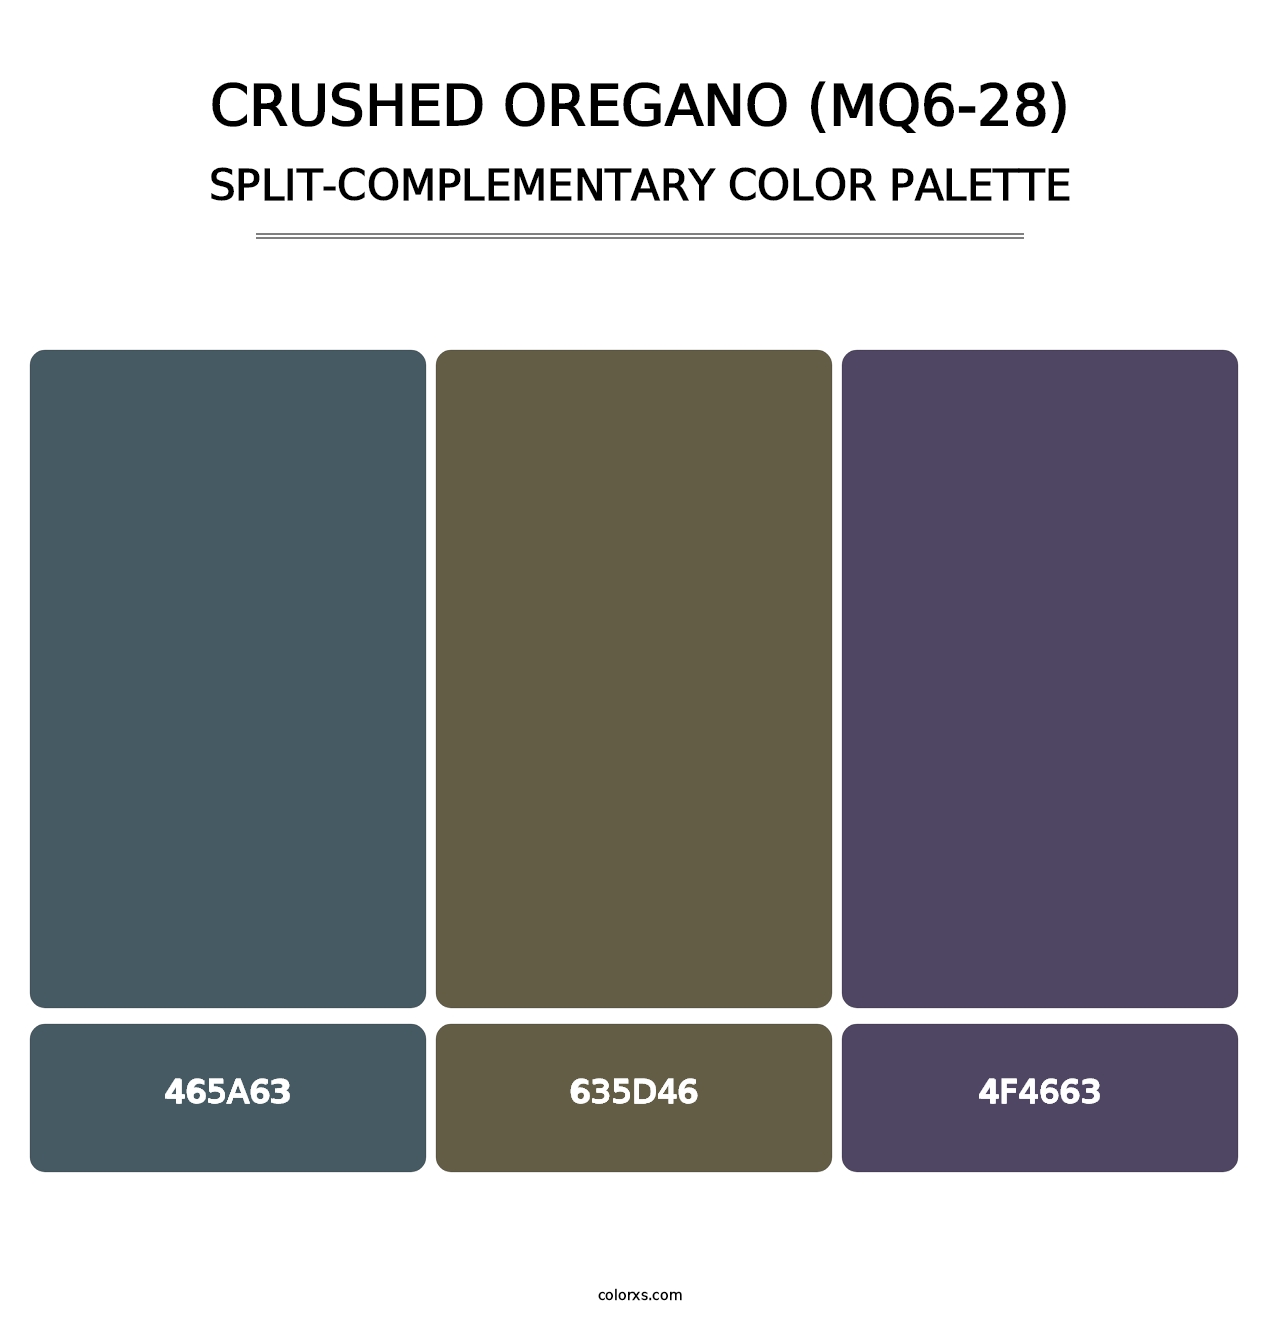 Crushed Oregano (MQ6-28) - Split-Complementary Color Palette